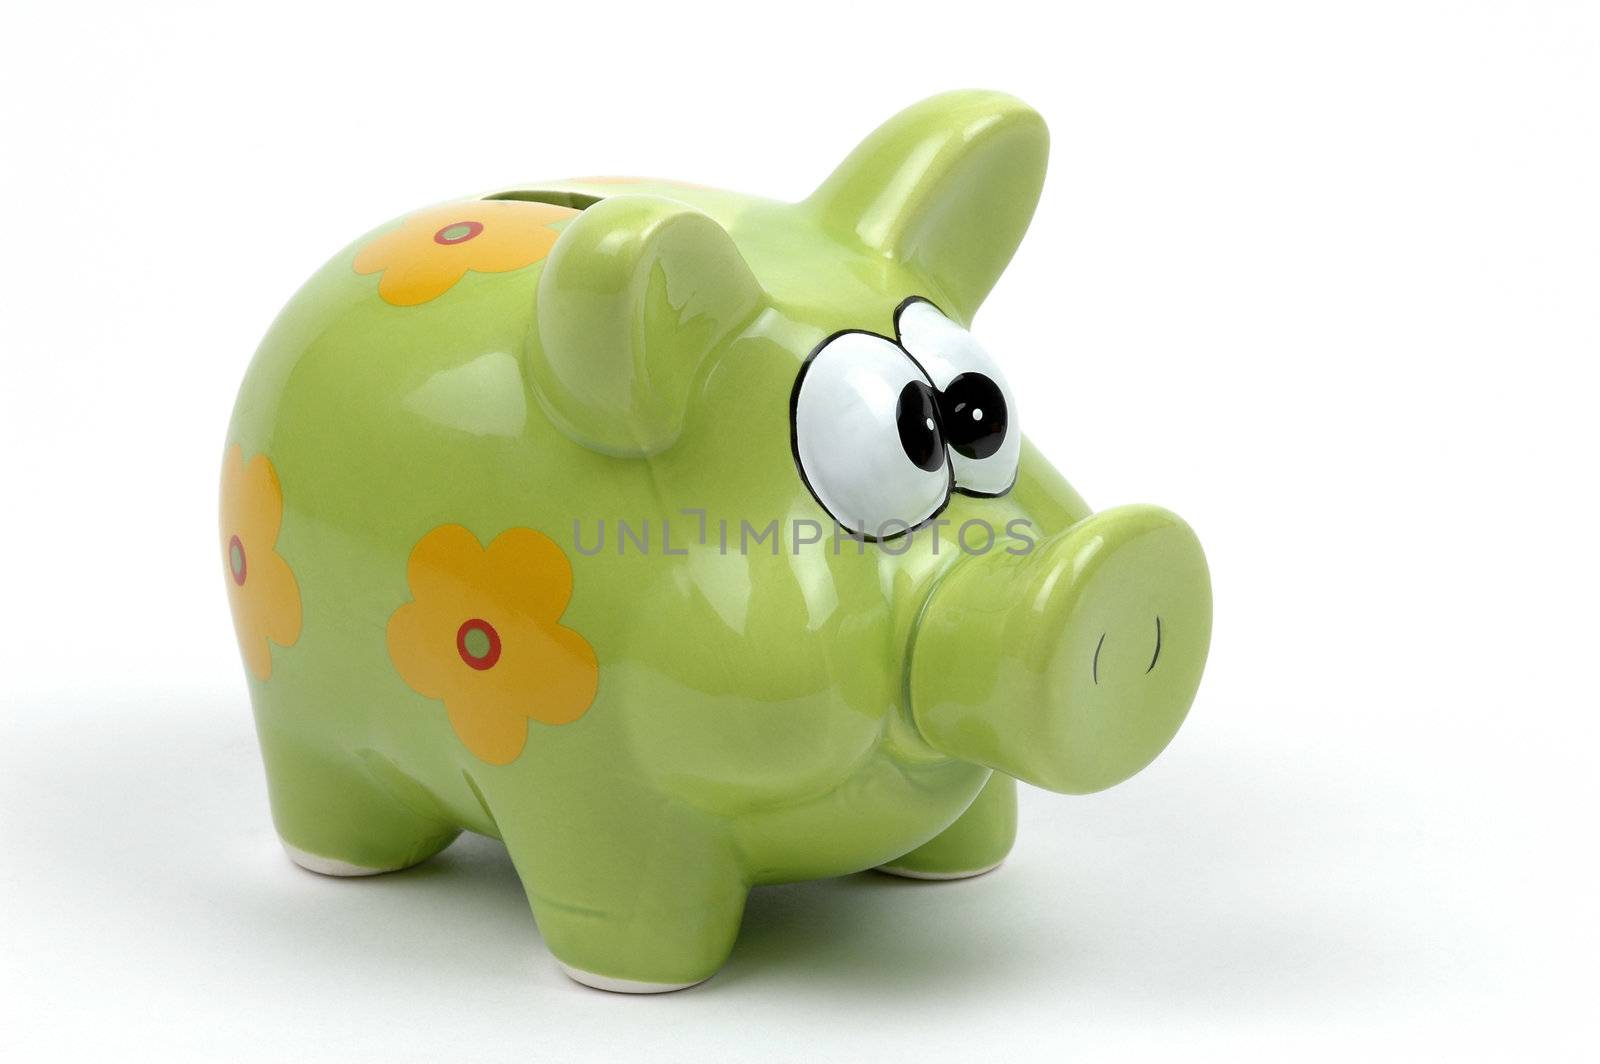 Brightly painted piggybank on a white background.